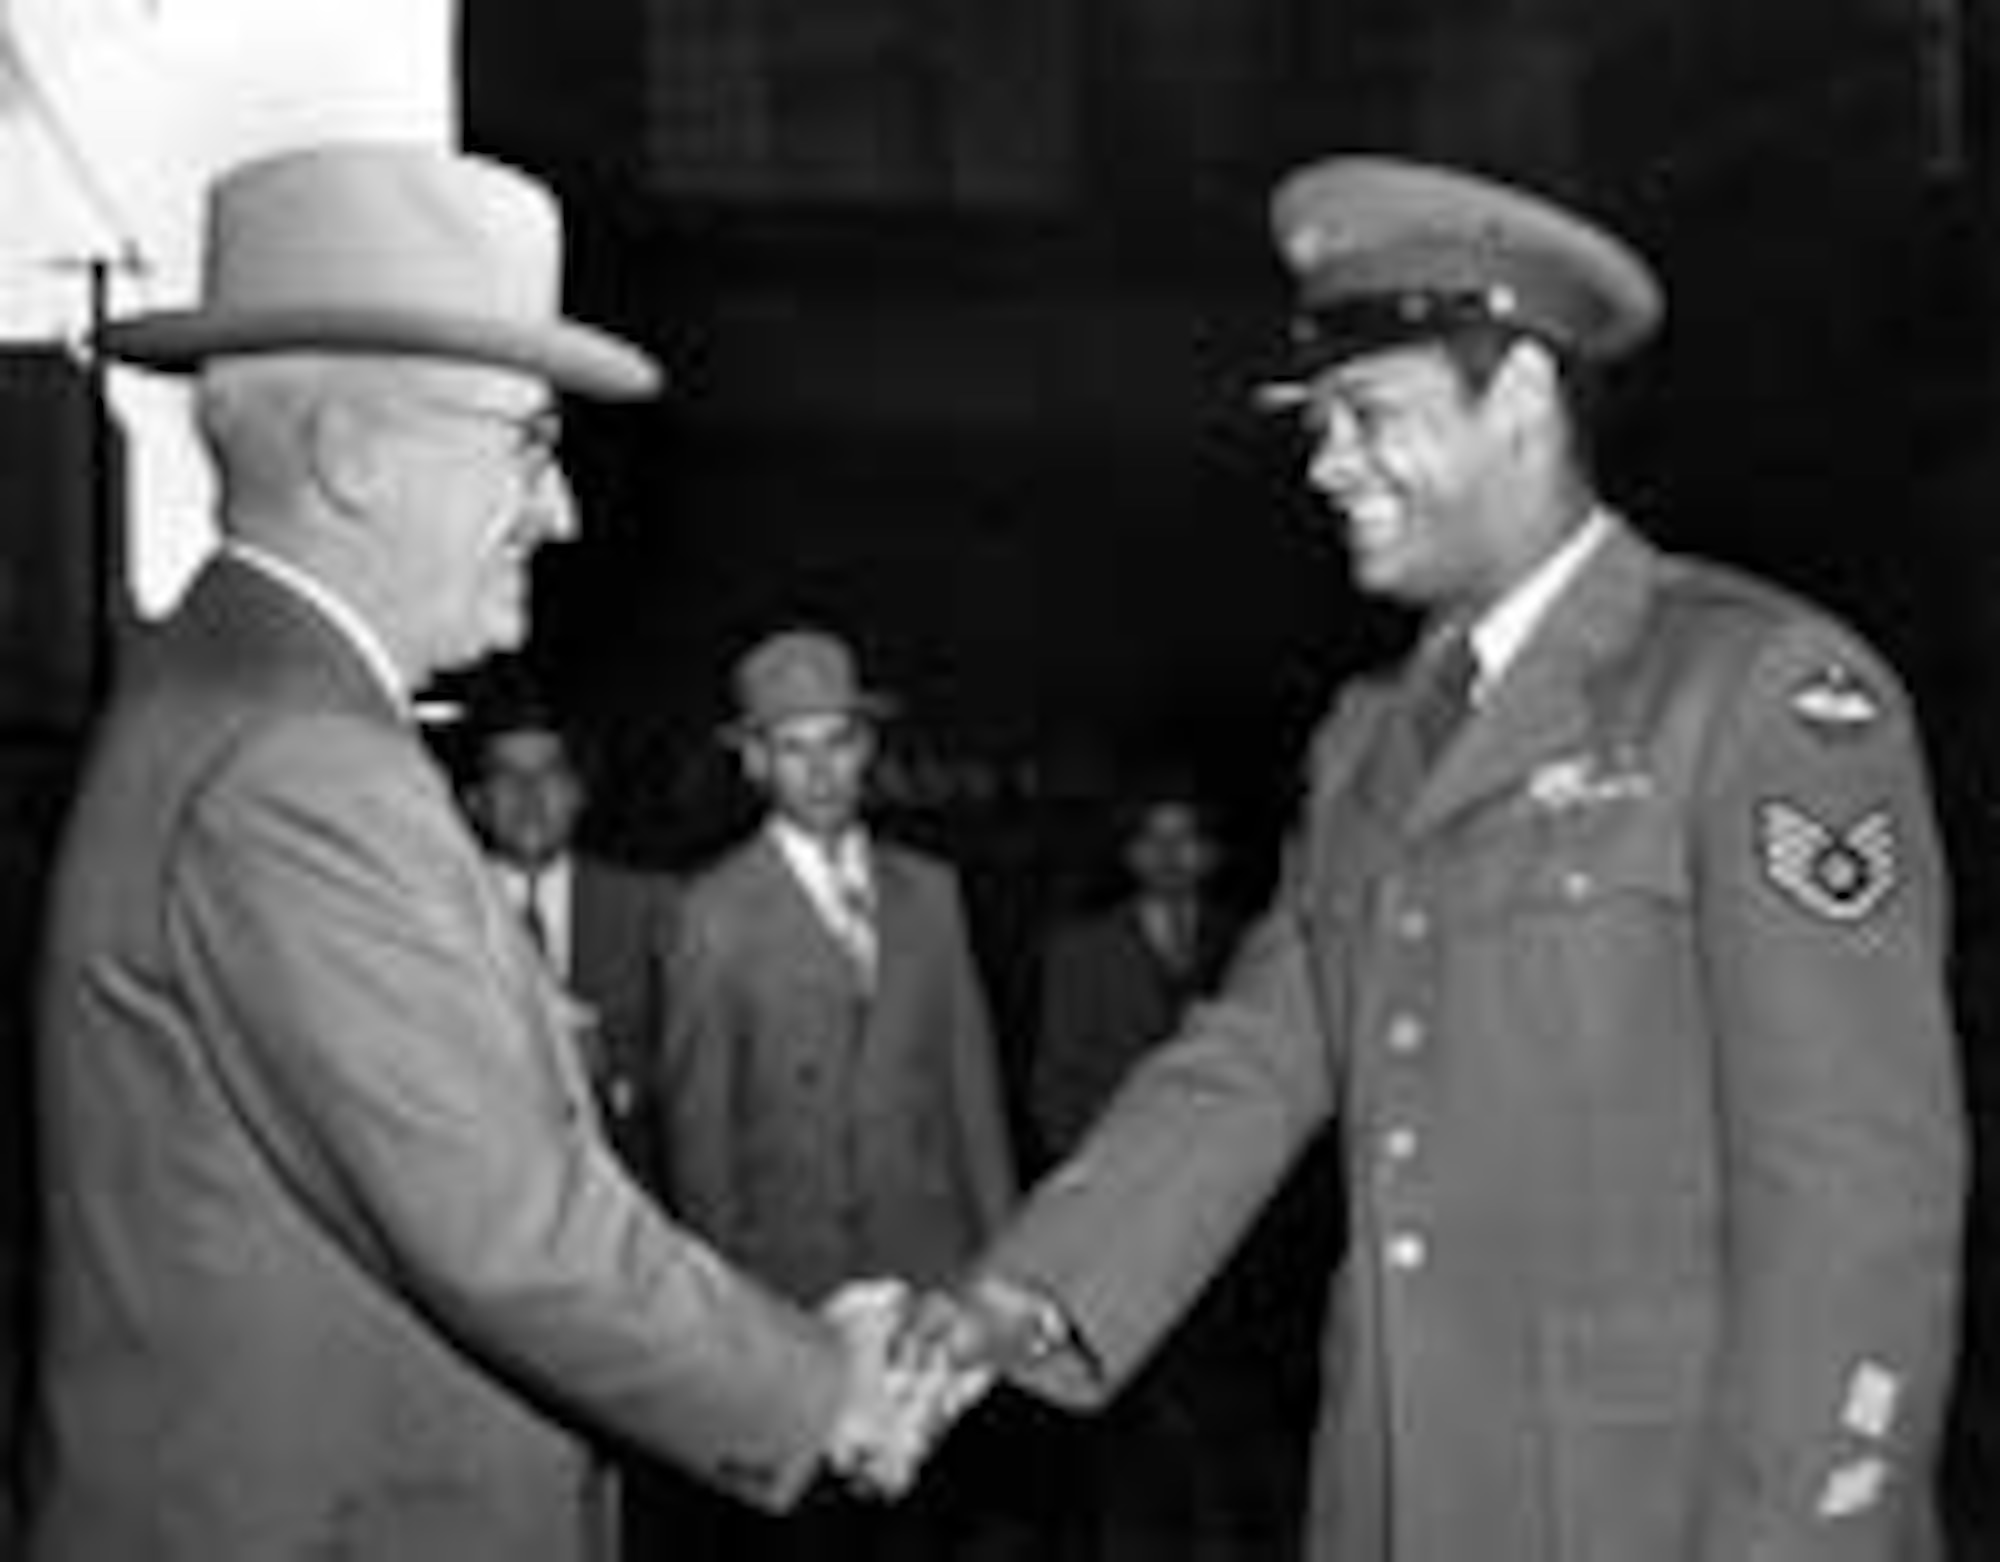 U.S. Air Force Staff Sergeant Edward Williams of St. Louis, exchanges a hearty handshake with his Commander-in-Chief, President Harry S. Truman, Oct. 13, 1950, at a casual meeting during the President's morning walk. Williams had been in the Air Force nine years at the time of this photograph. (Courtesy photo)